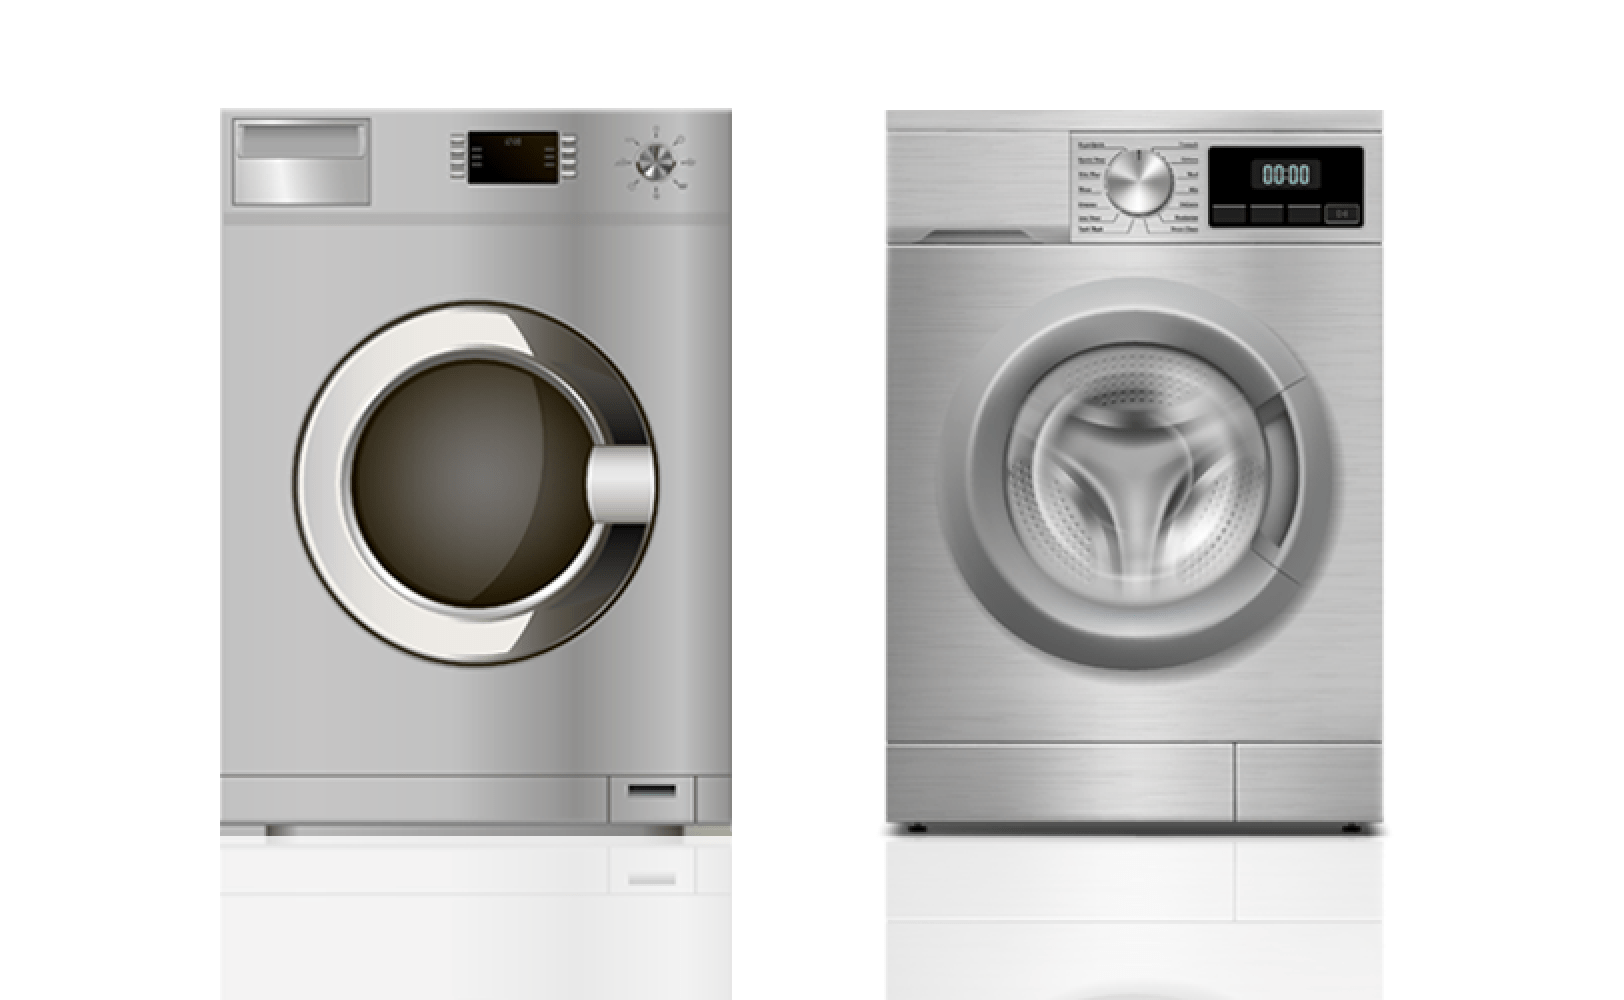 Washer Repair Service in Amityville